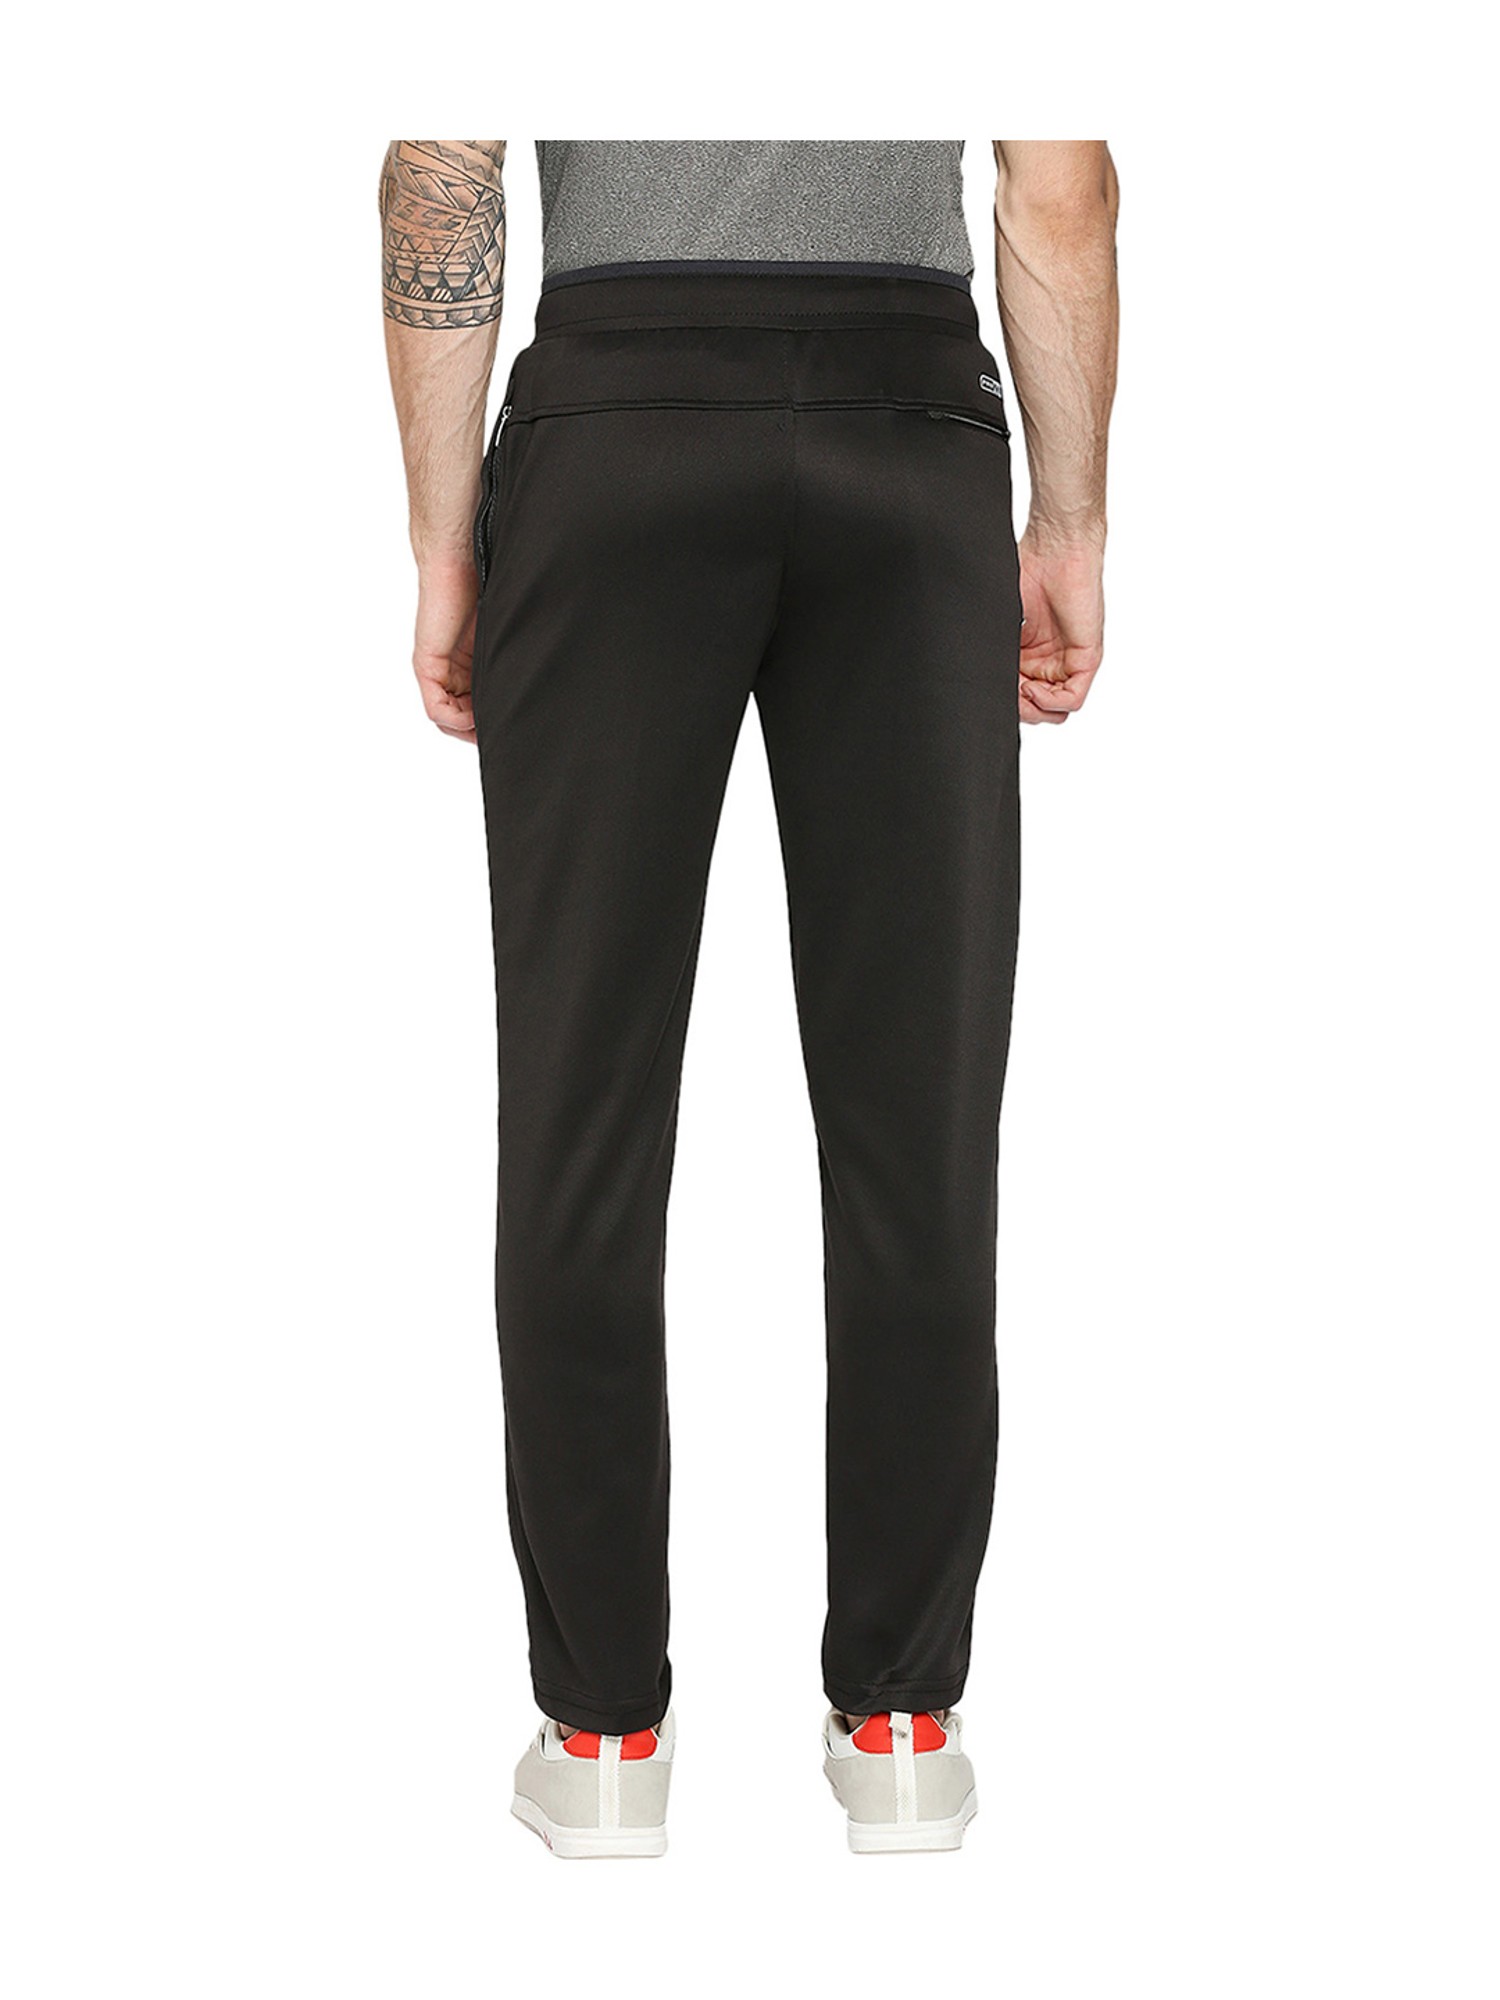 BLACK PANTHER Solid Women Black Track Pants  Buy BLACK PANTHER Solid Women  Black Track Pants Online at Best Prices in India  Flipkartcom